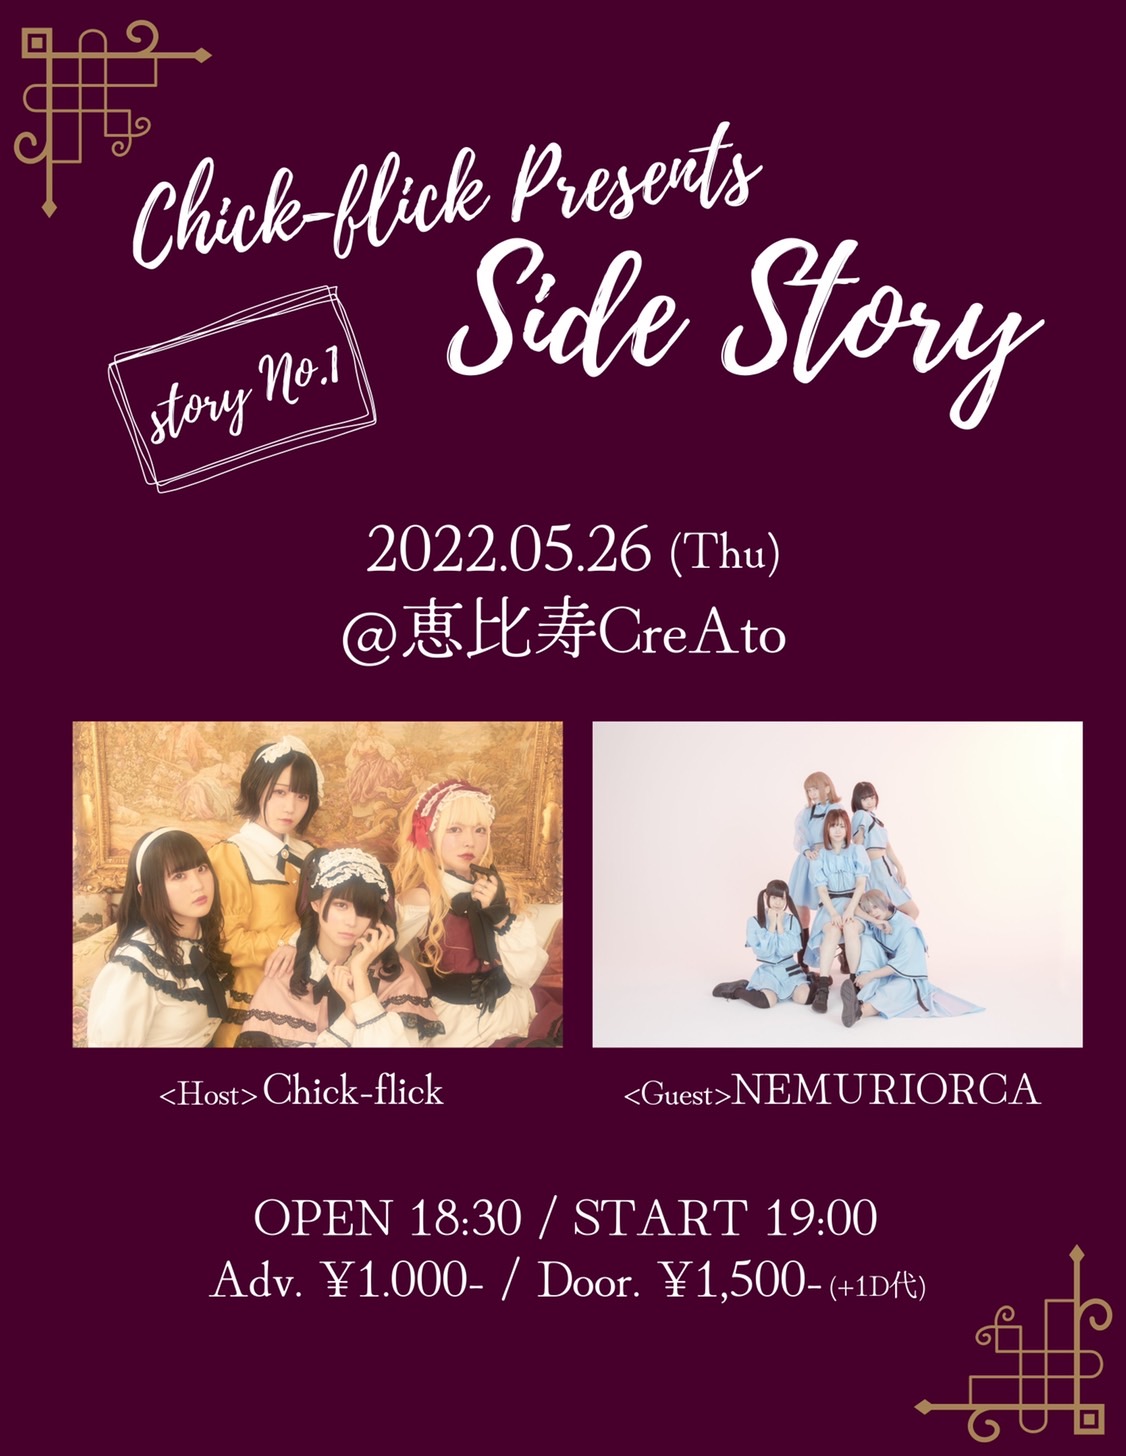 『Chick-flick Presents 「Side Story」<story No.1>』